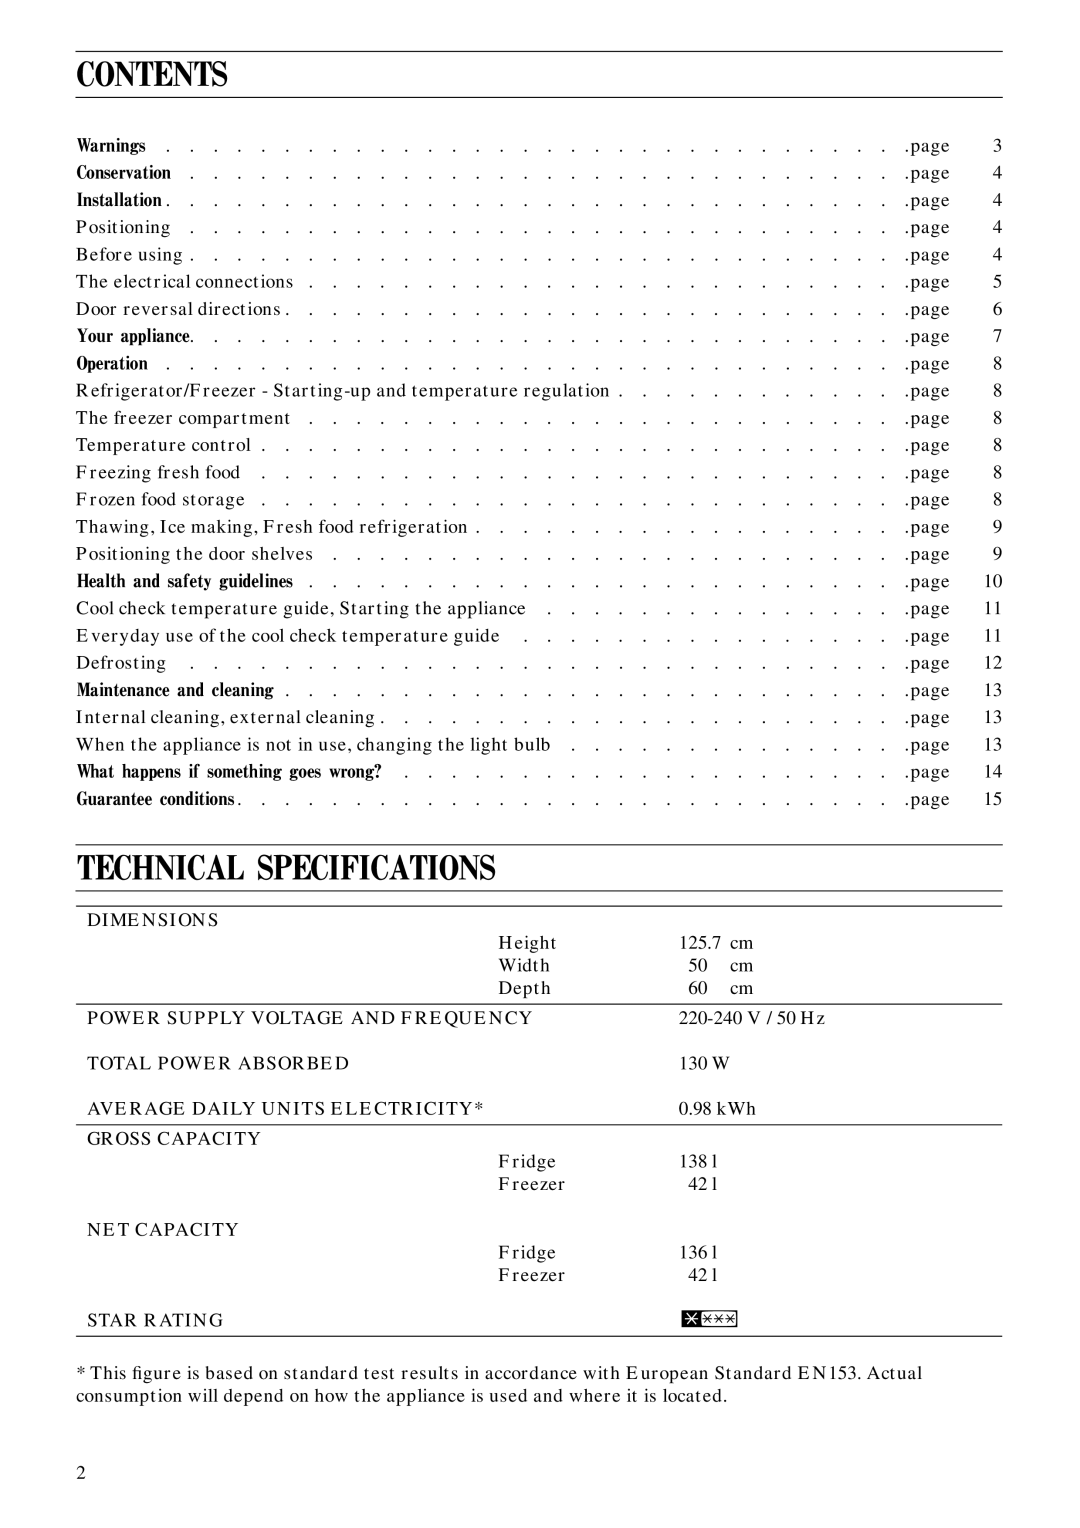 Zanussi ZFC 50/17 AL manual Contents, Technical Specifications 